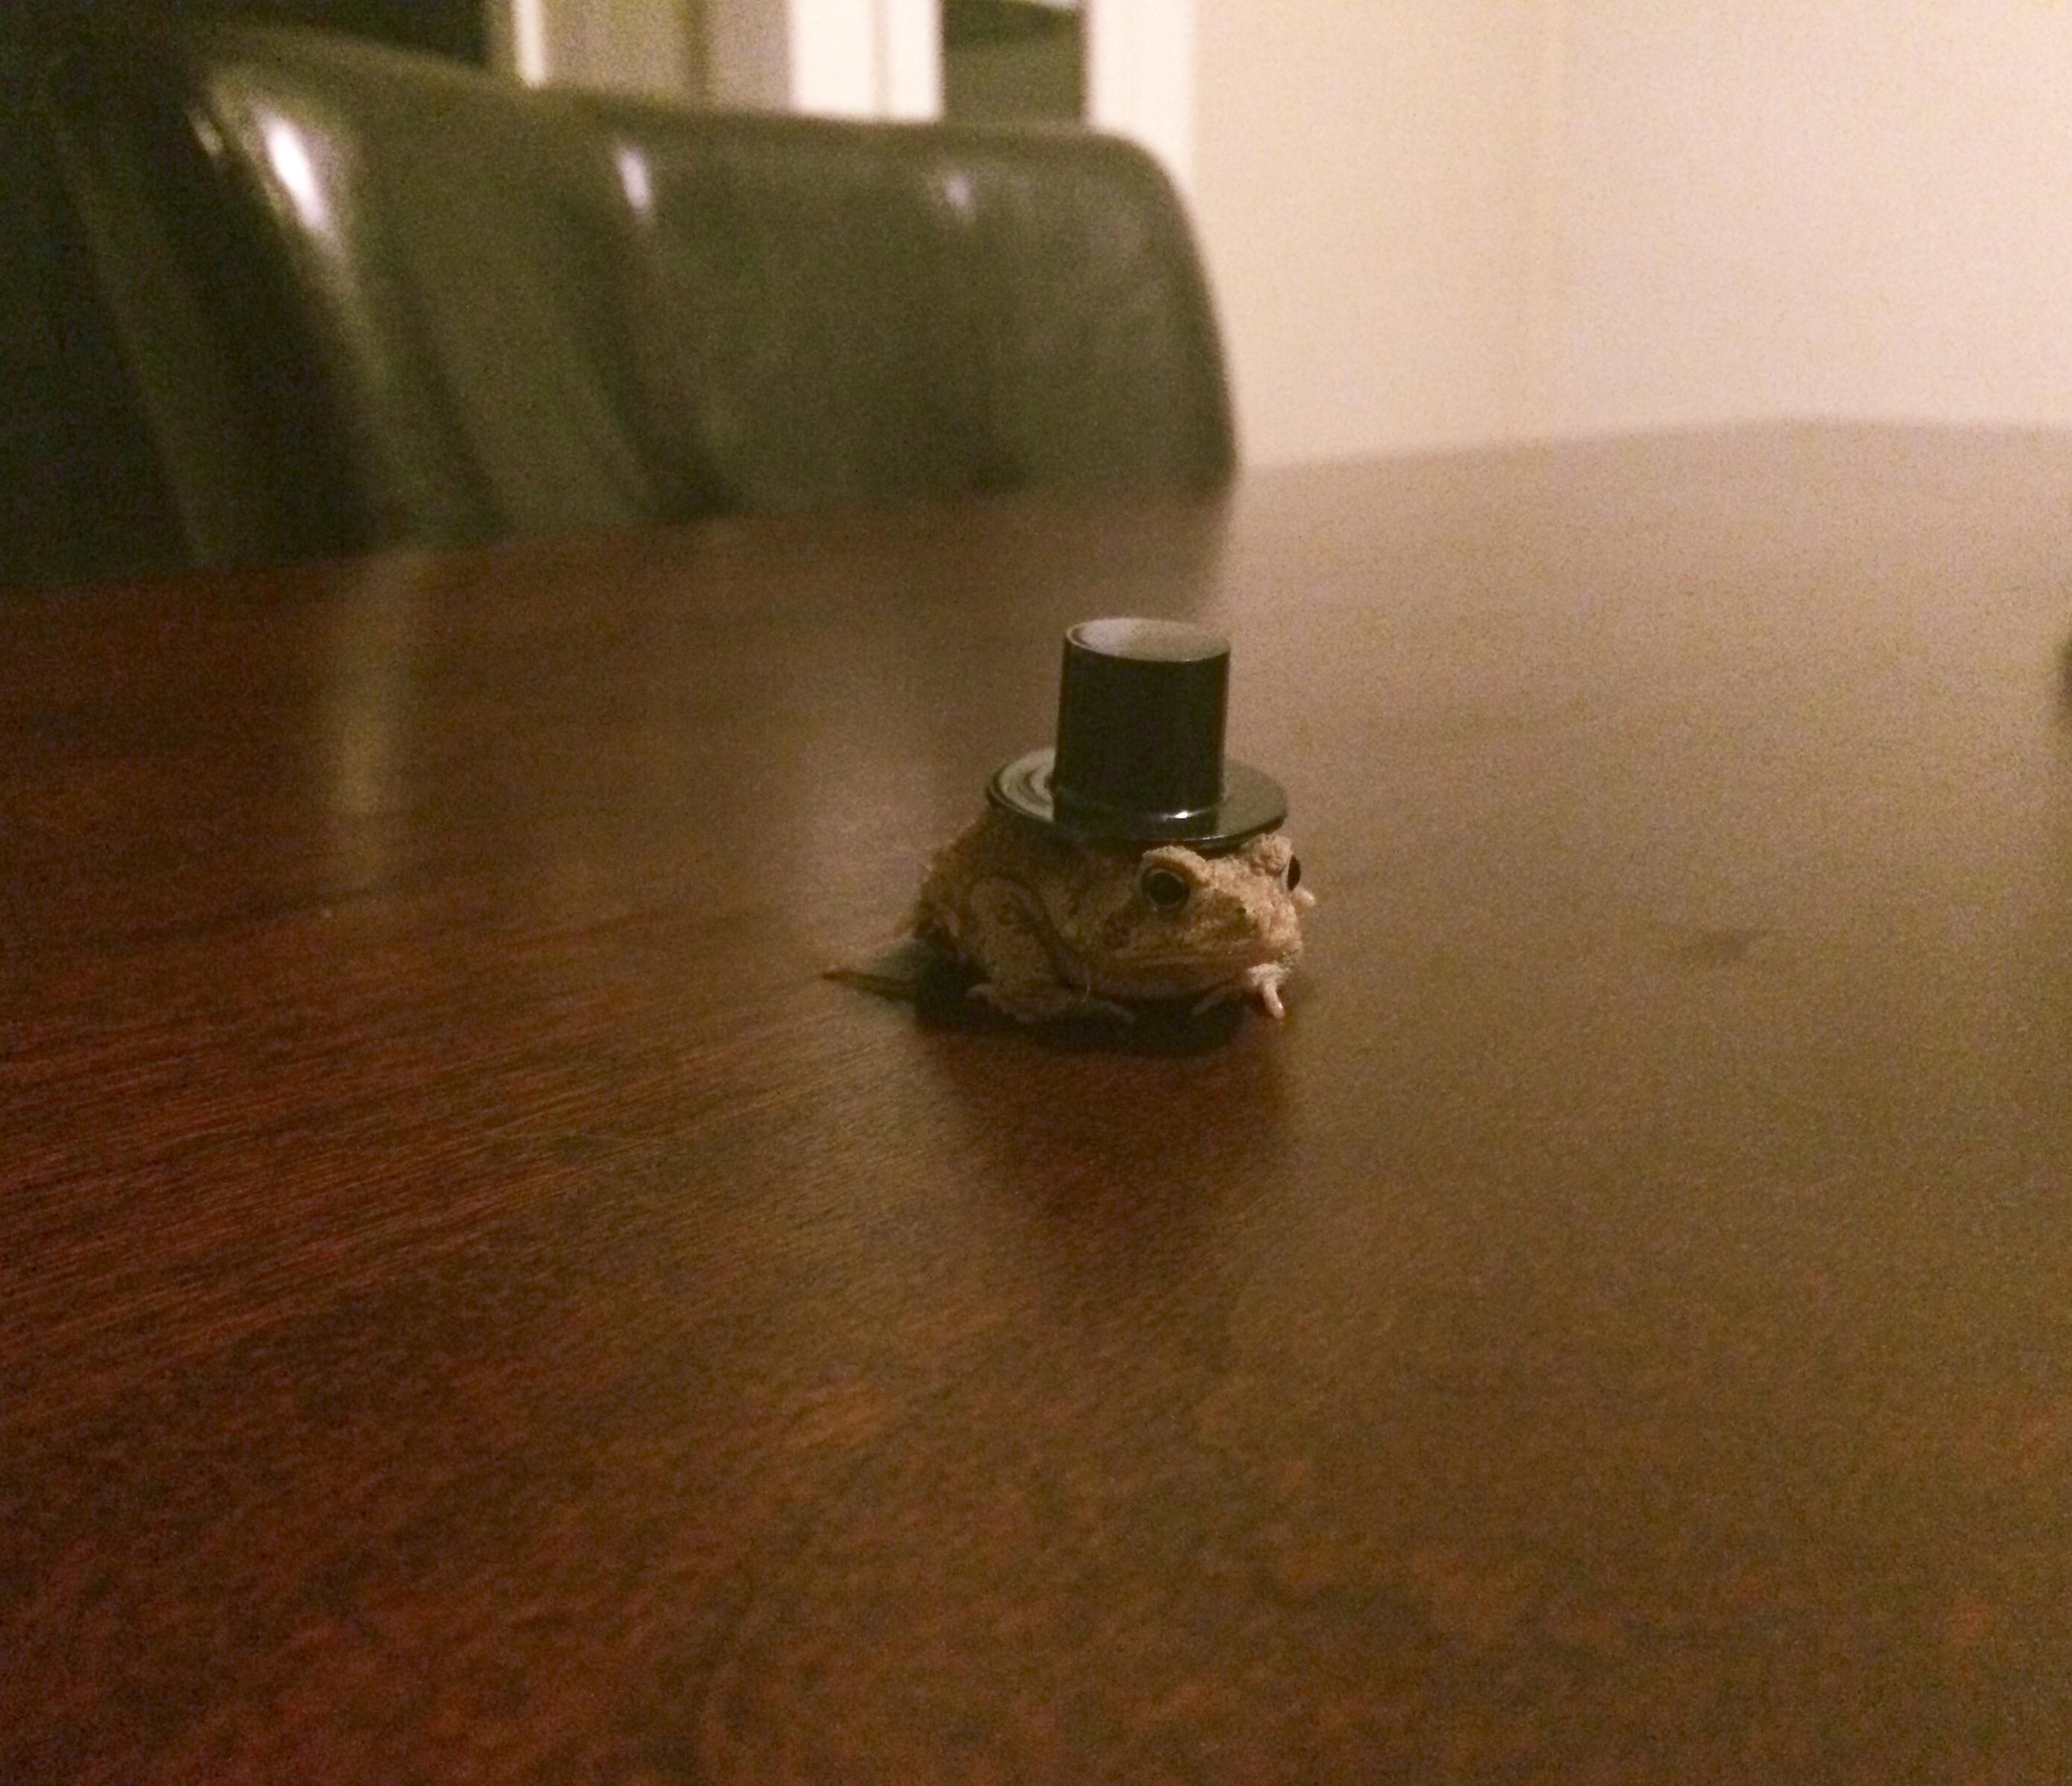 Awhile ago I posted about how while I was drunk I ordered 100 tiny top hats for my toad.. Meet my new little guy looking quite dapper! No regrets.